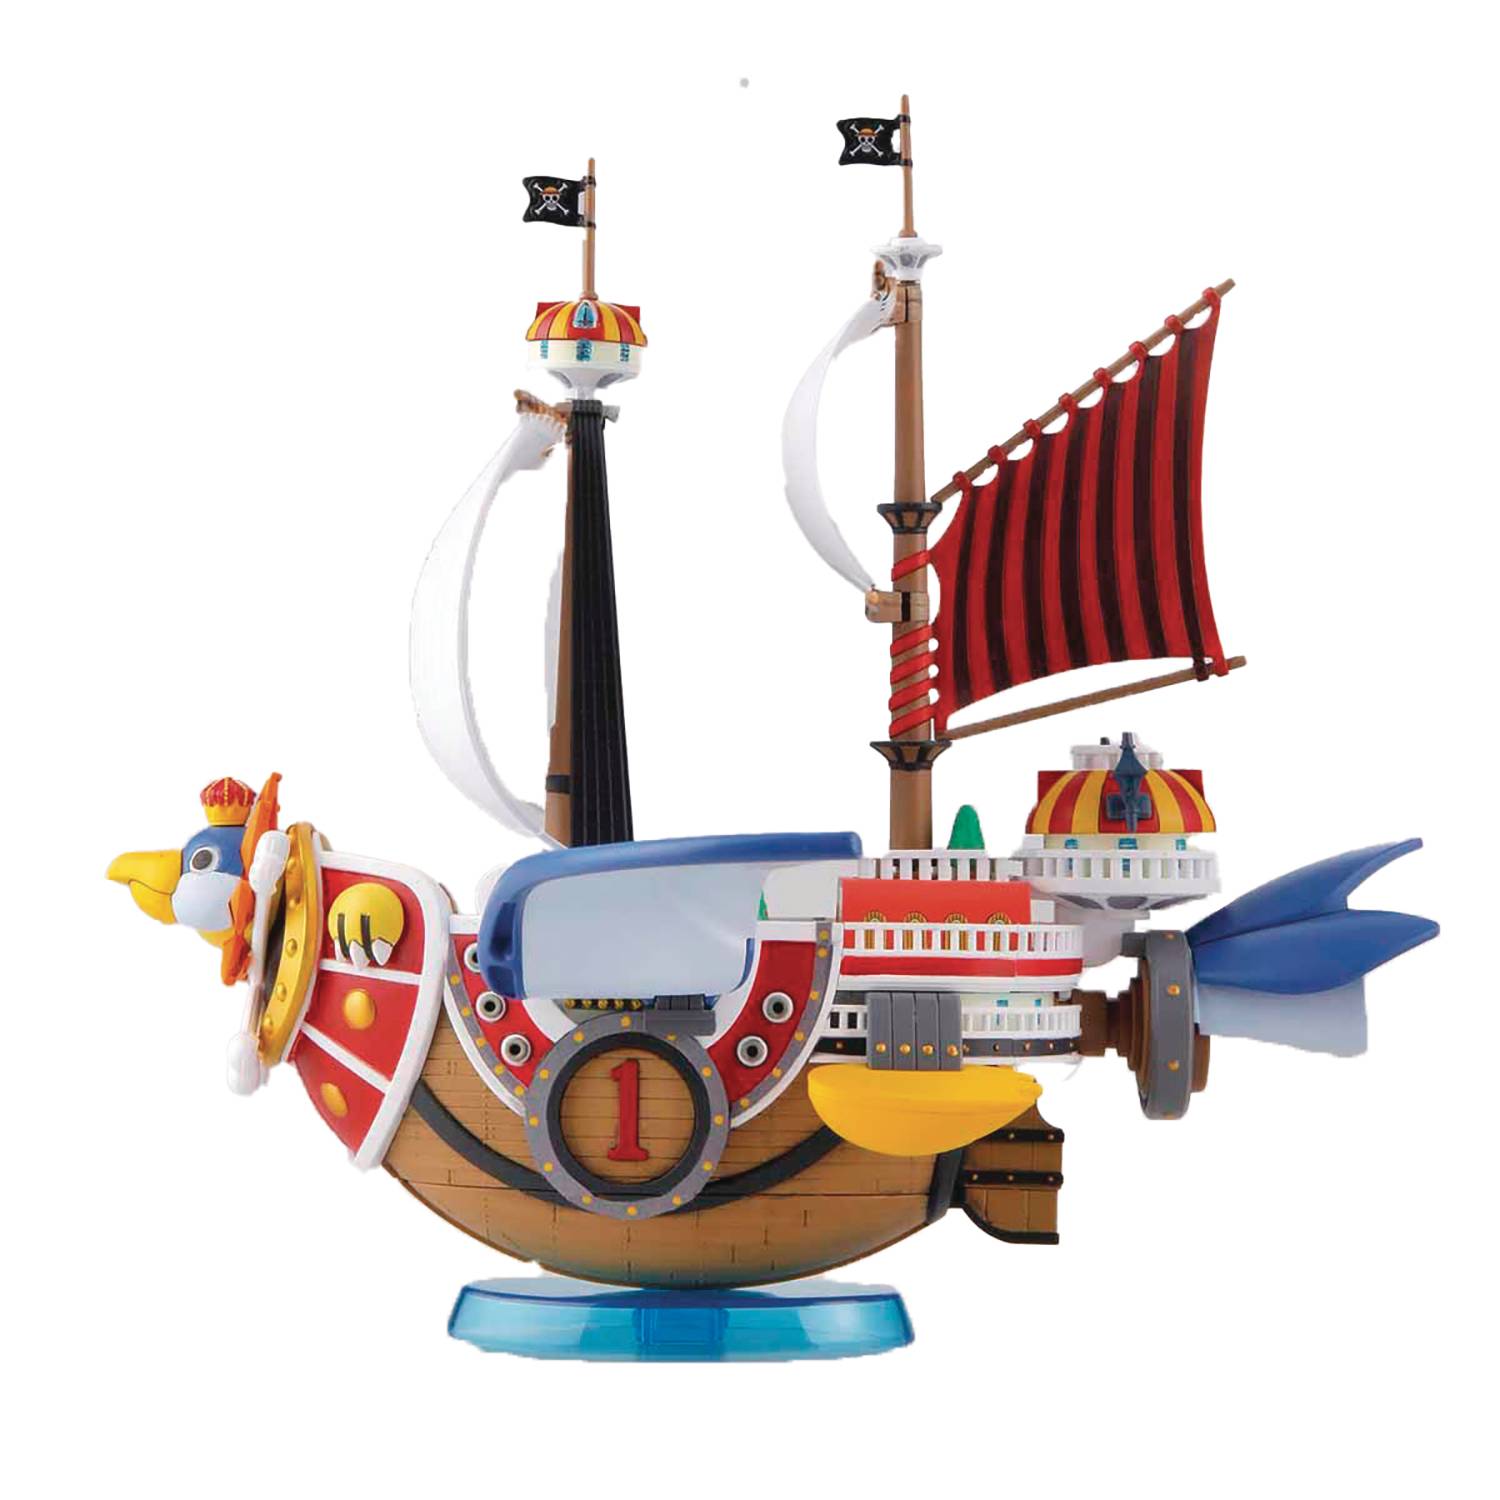 ONE PIECE - THOUSAND SUNNY (FLYING VERSION) - GRAND SHIP COLLECTION 15